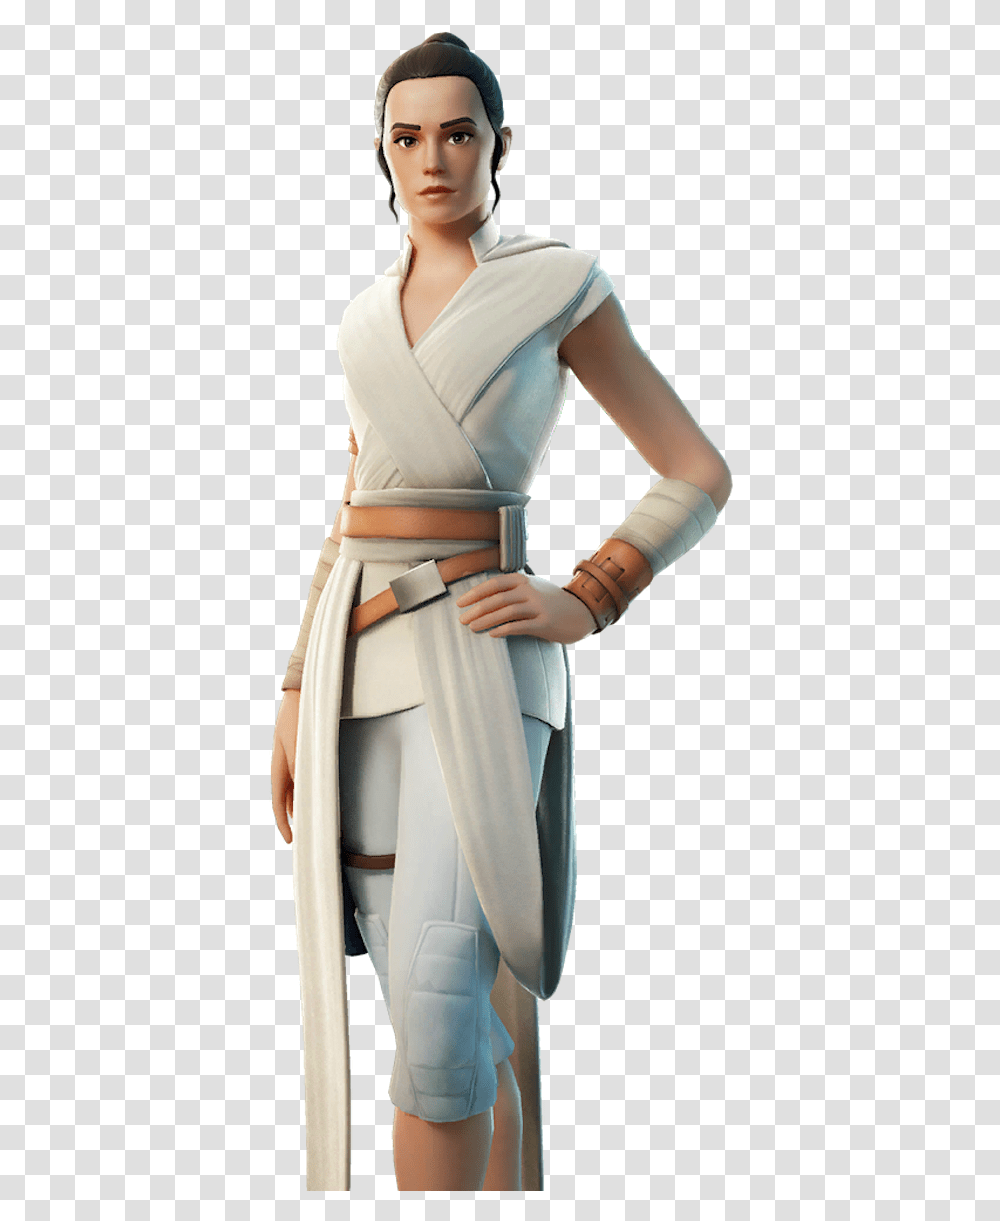 Fortnite Daily Shop Battle Royale Skins And Items In Star Wars Fortnite Rey, Clothing, Apparel, Robe, Fashion Transparent Png